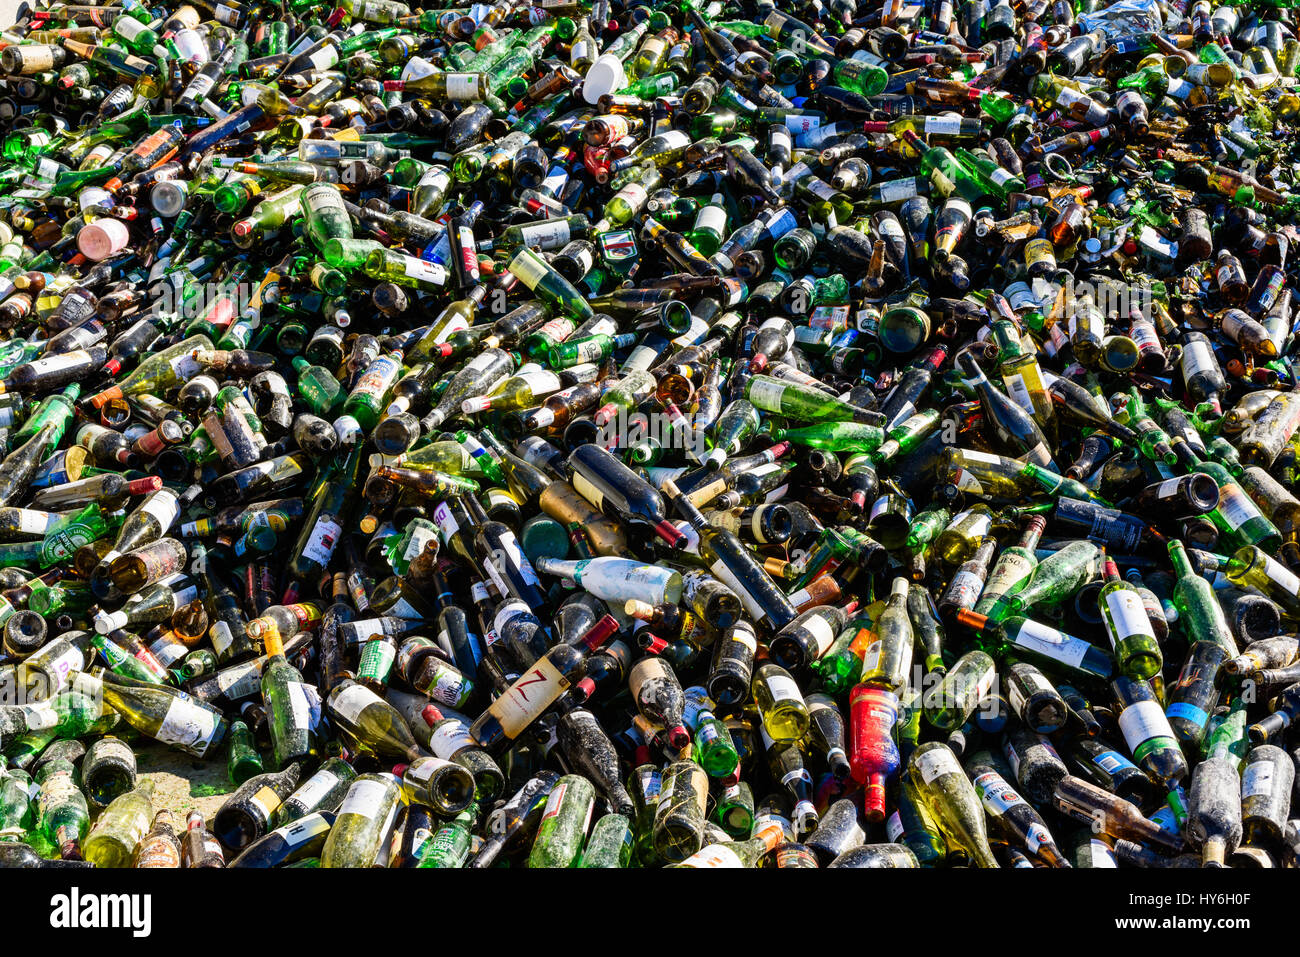 Ronneby, Sweden - March 27, 2017: Documentary of public waste station. Large pile of colored glass destined for recycling. Stock Photo